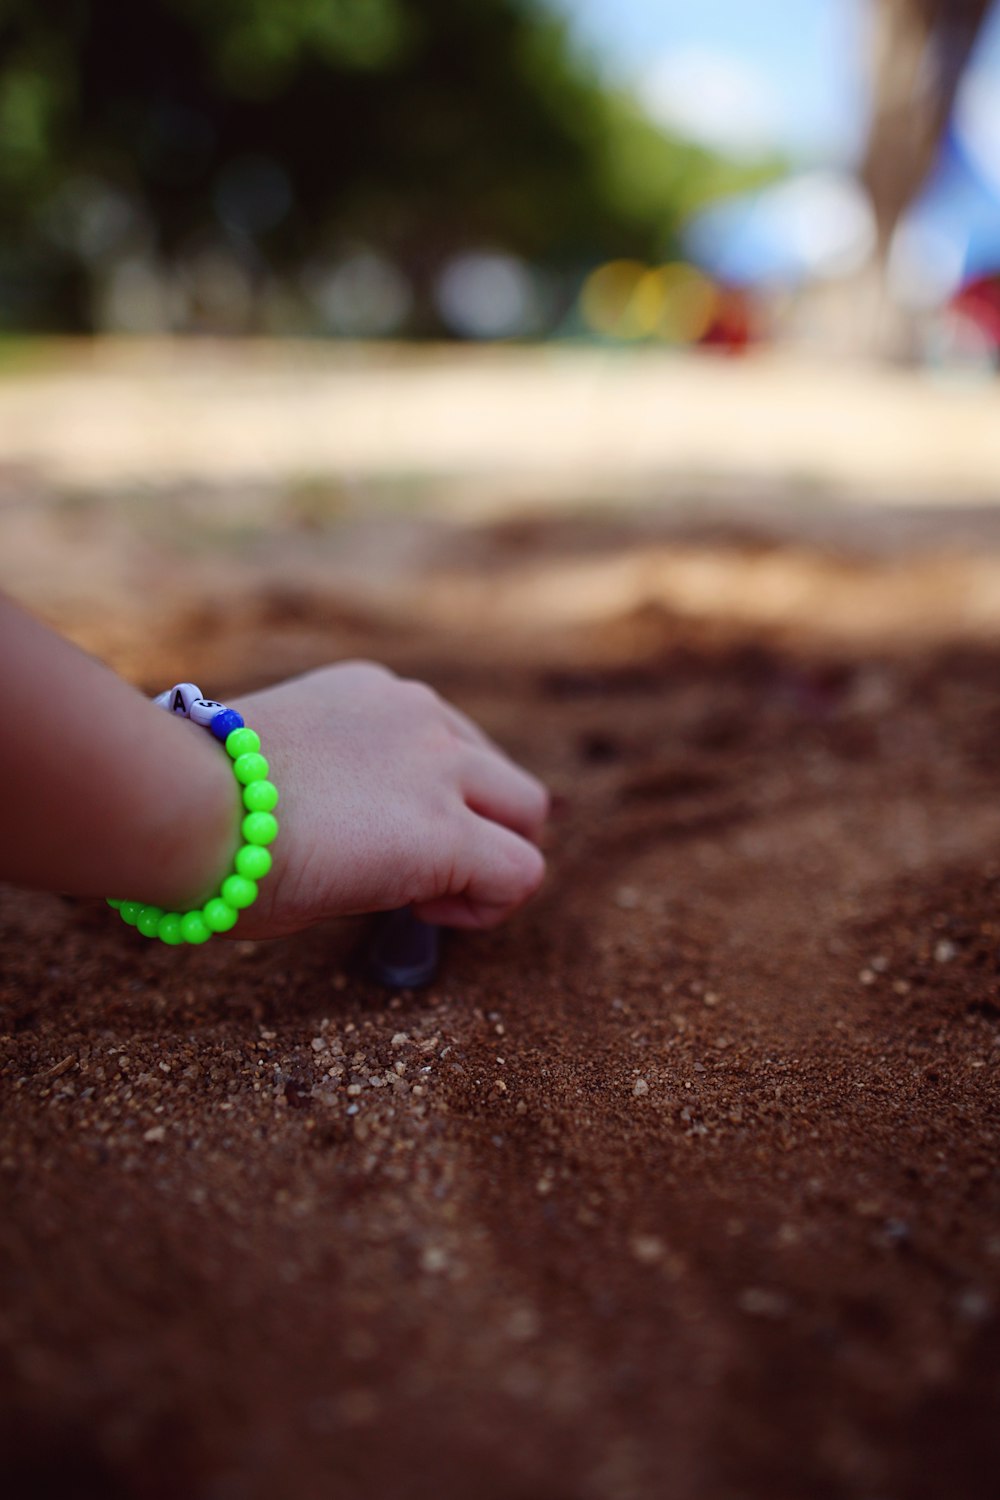 a child's hand with a green beaded bracelet